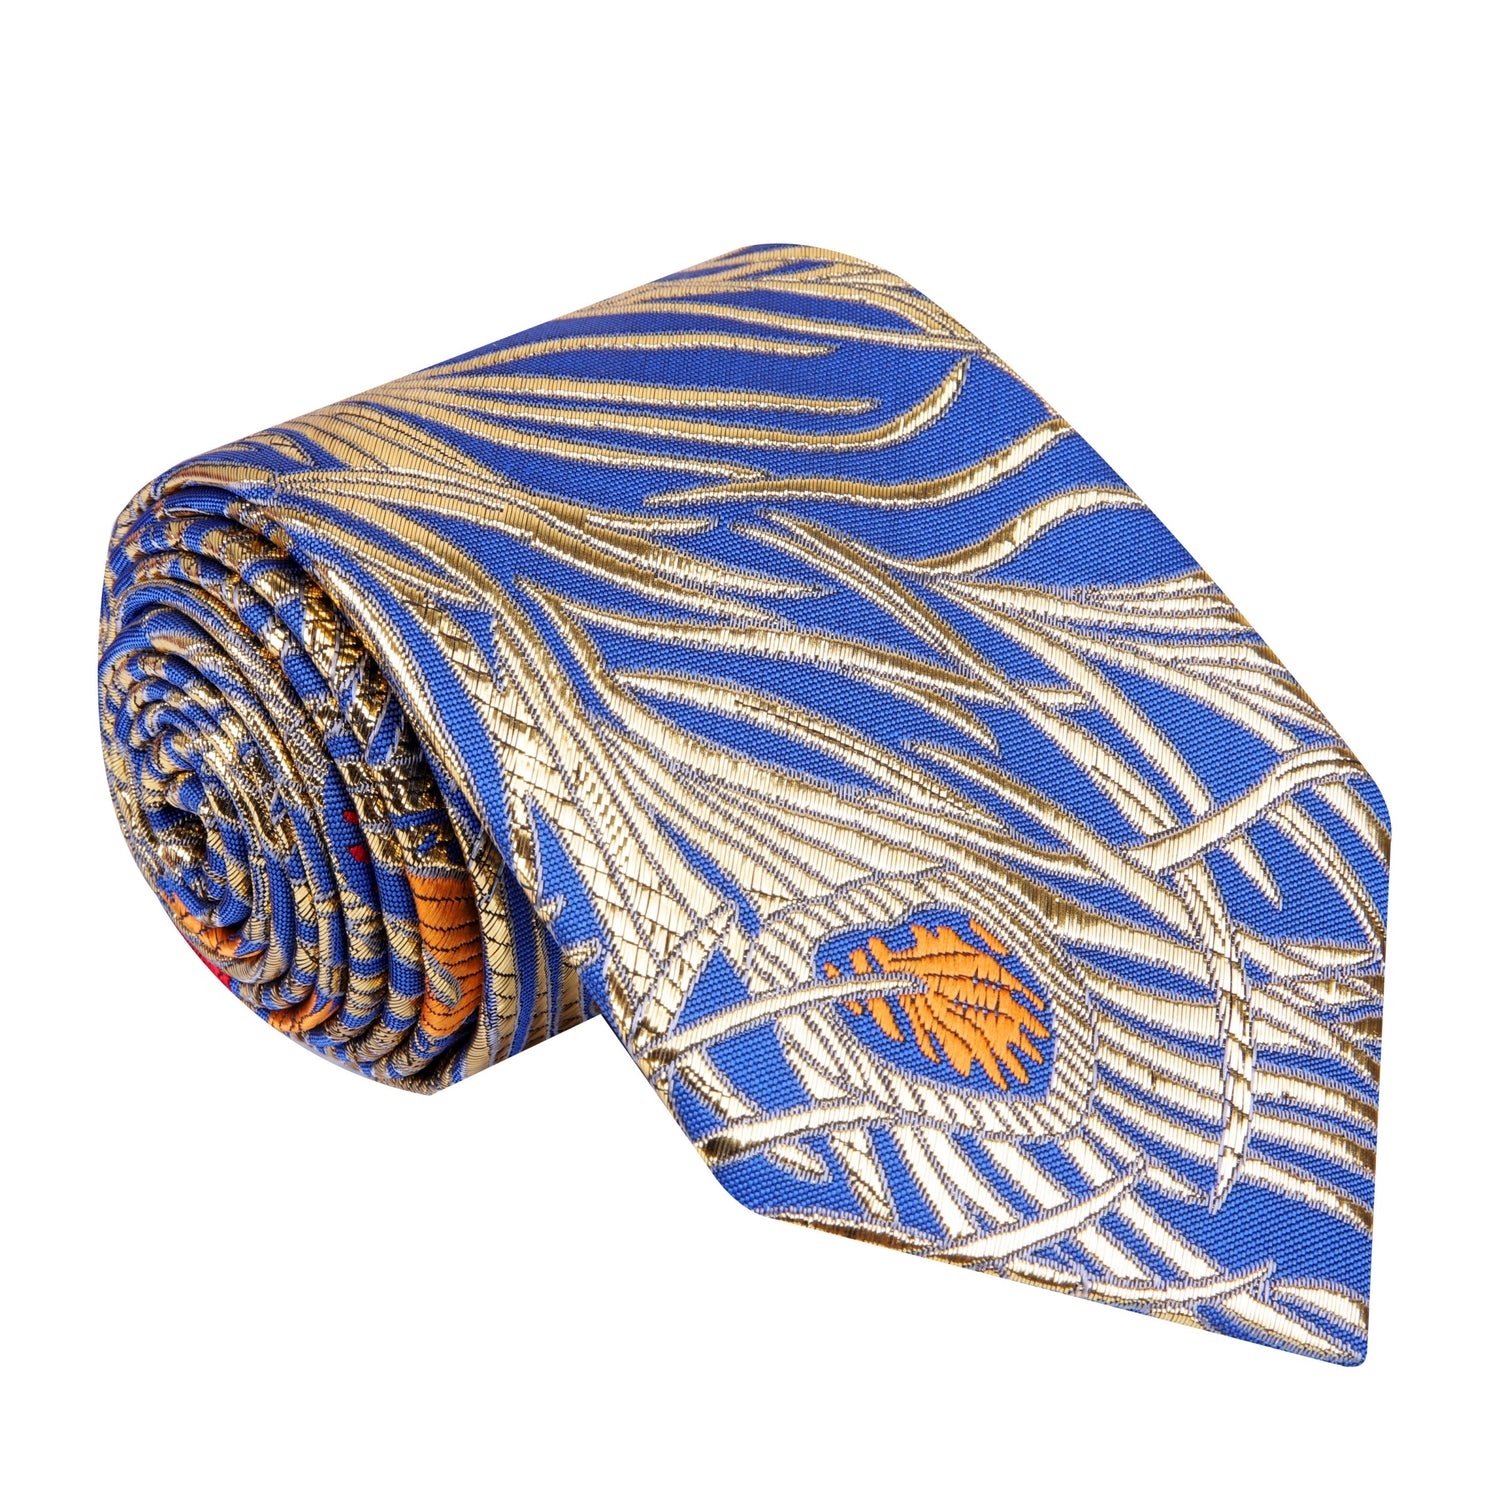 A Bright Blue With Metallic Gold, Blue, Red And Orange Color Abstract Peacock Pattern Silk Necktie 